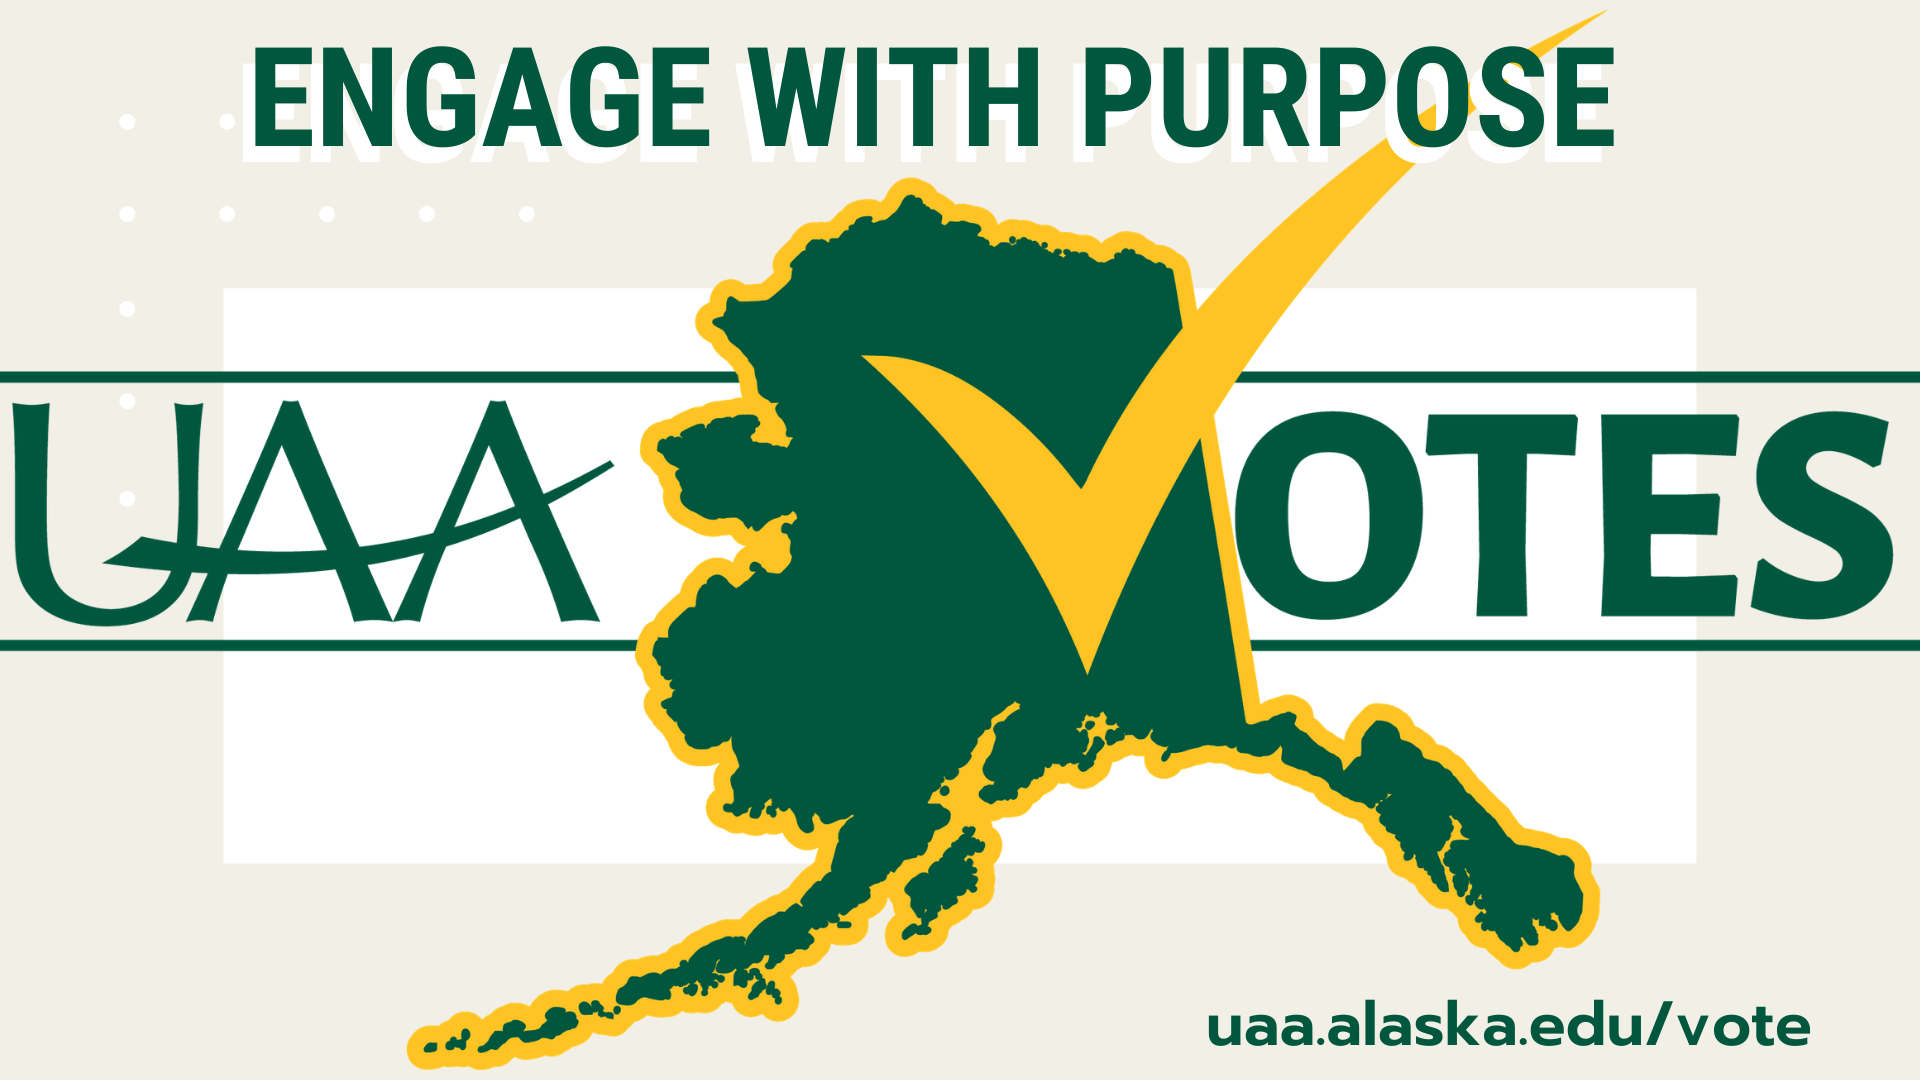 UAA Votes: Engage with Purpose